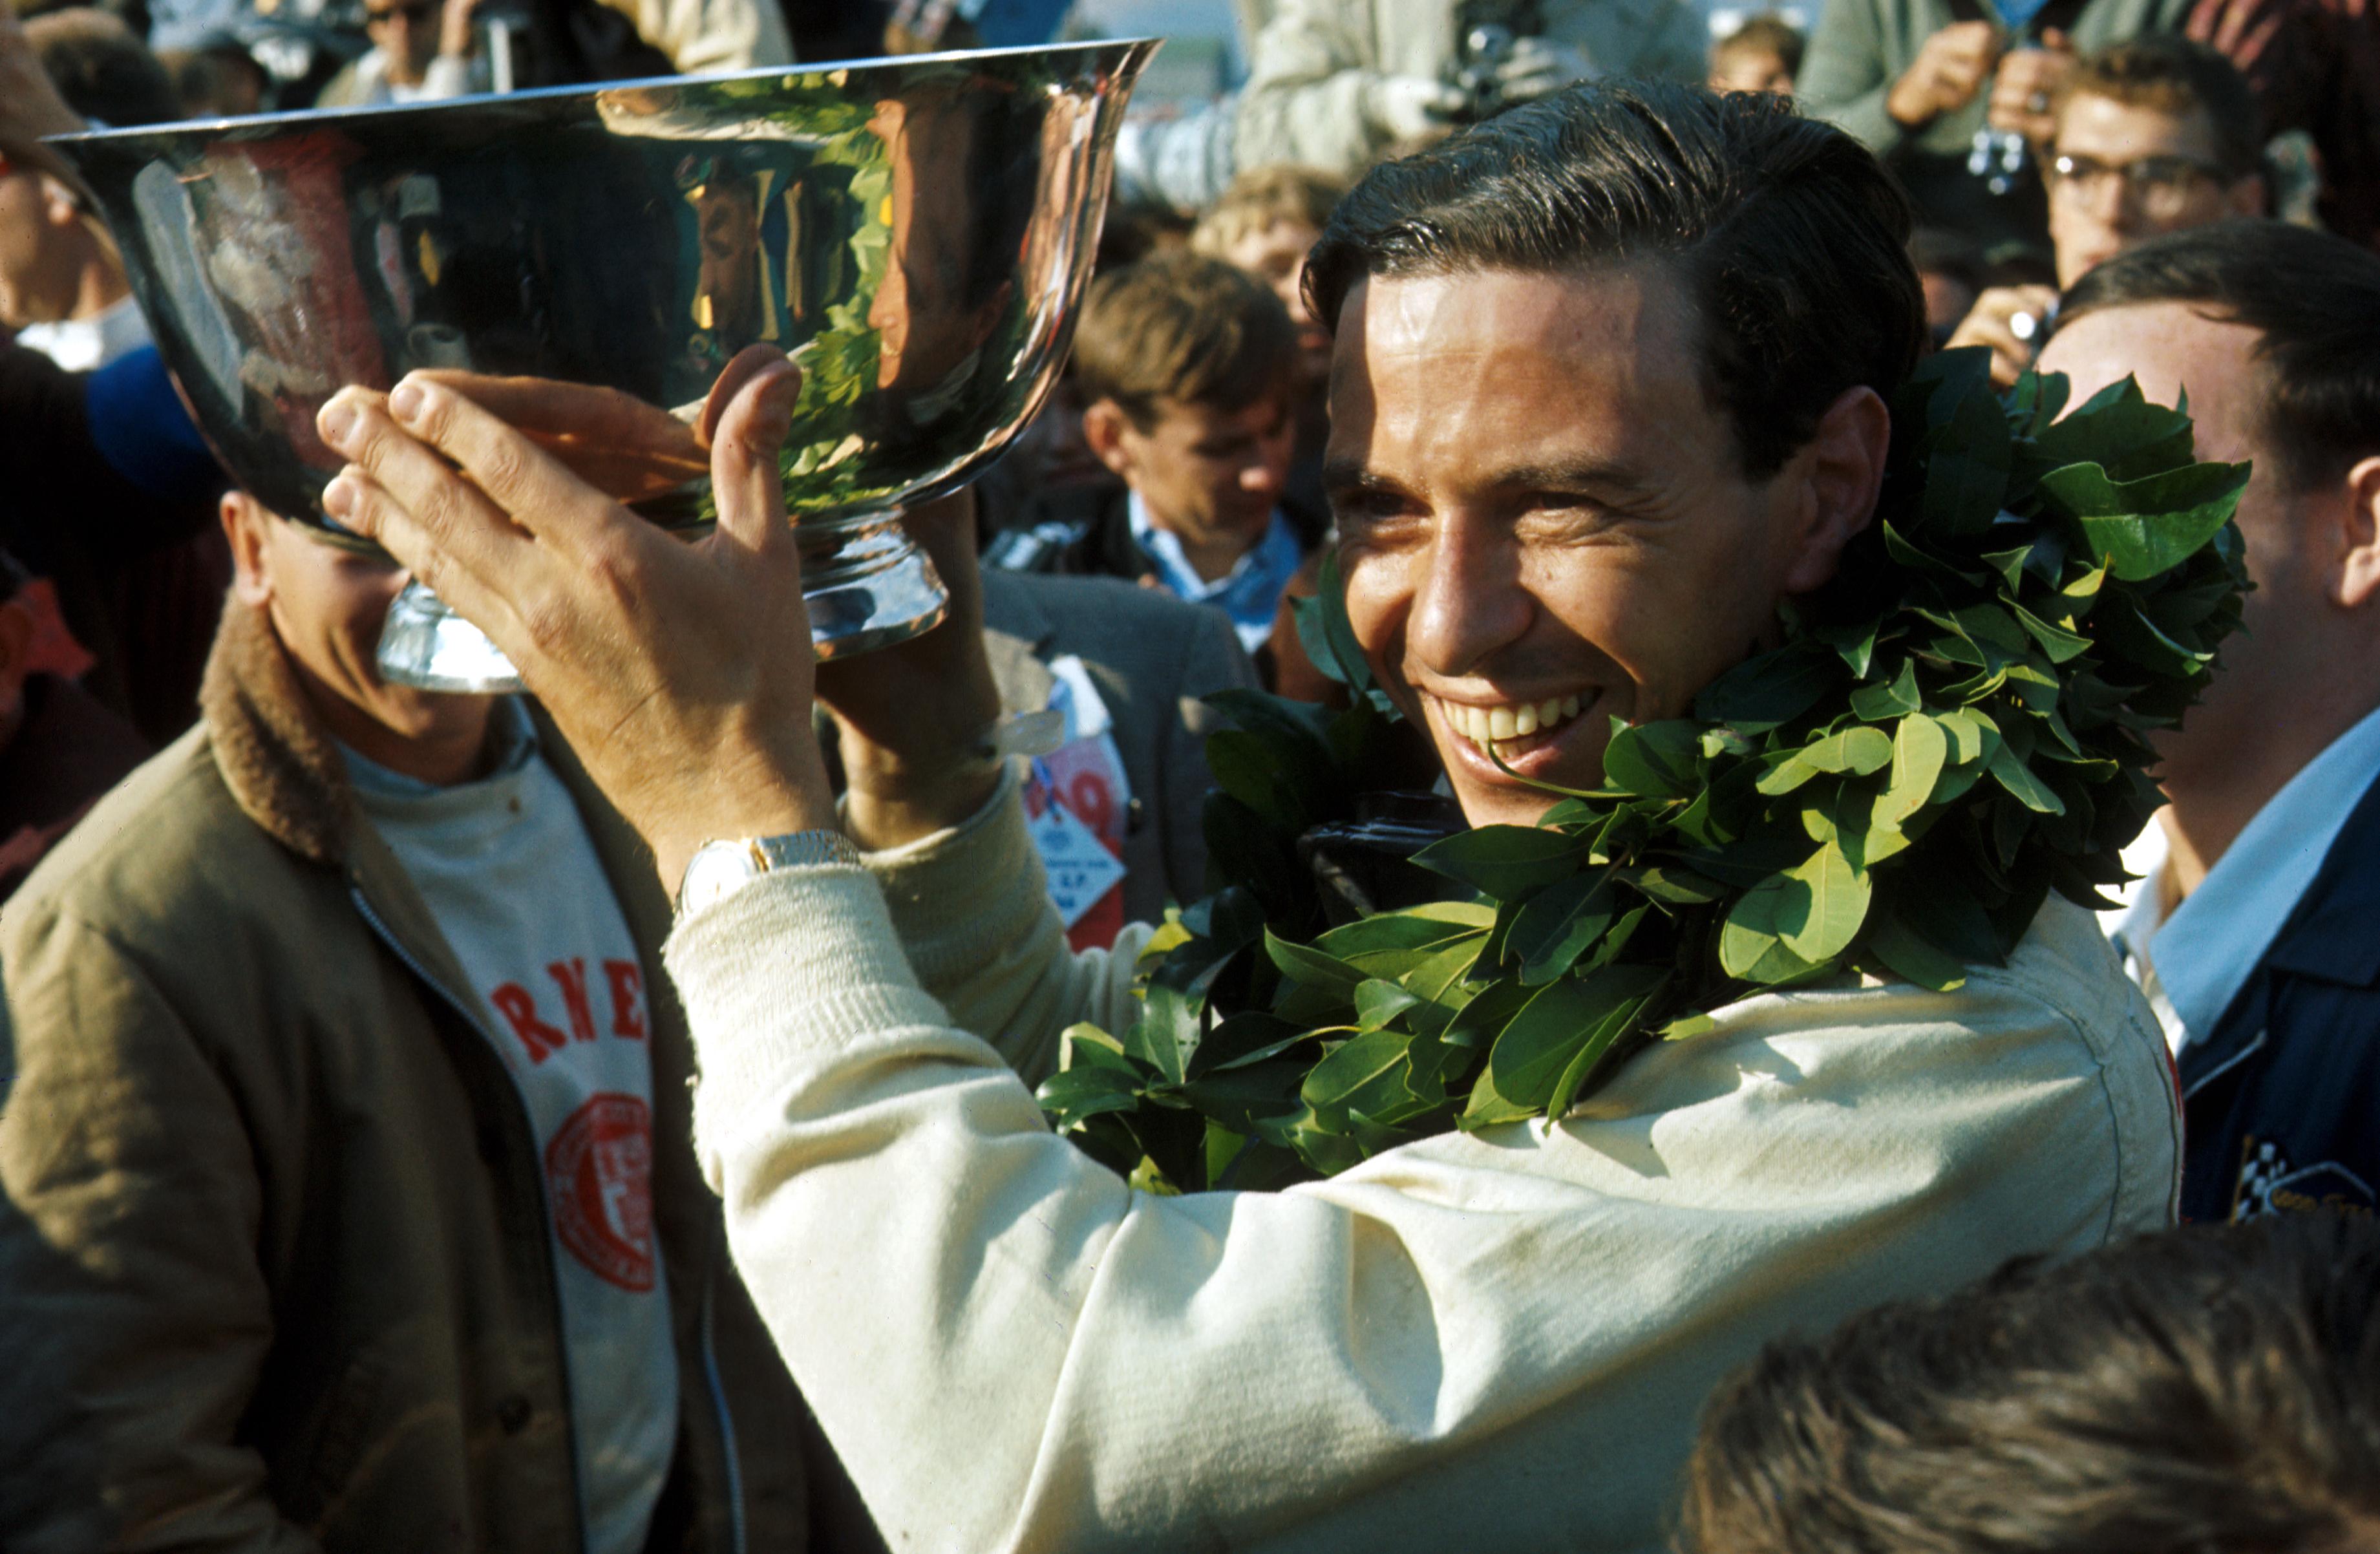 Jim Clark and Indy 500 Trophy